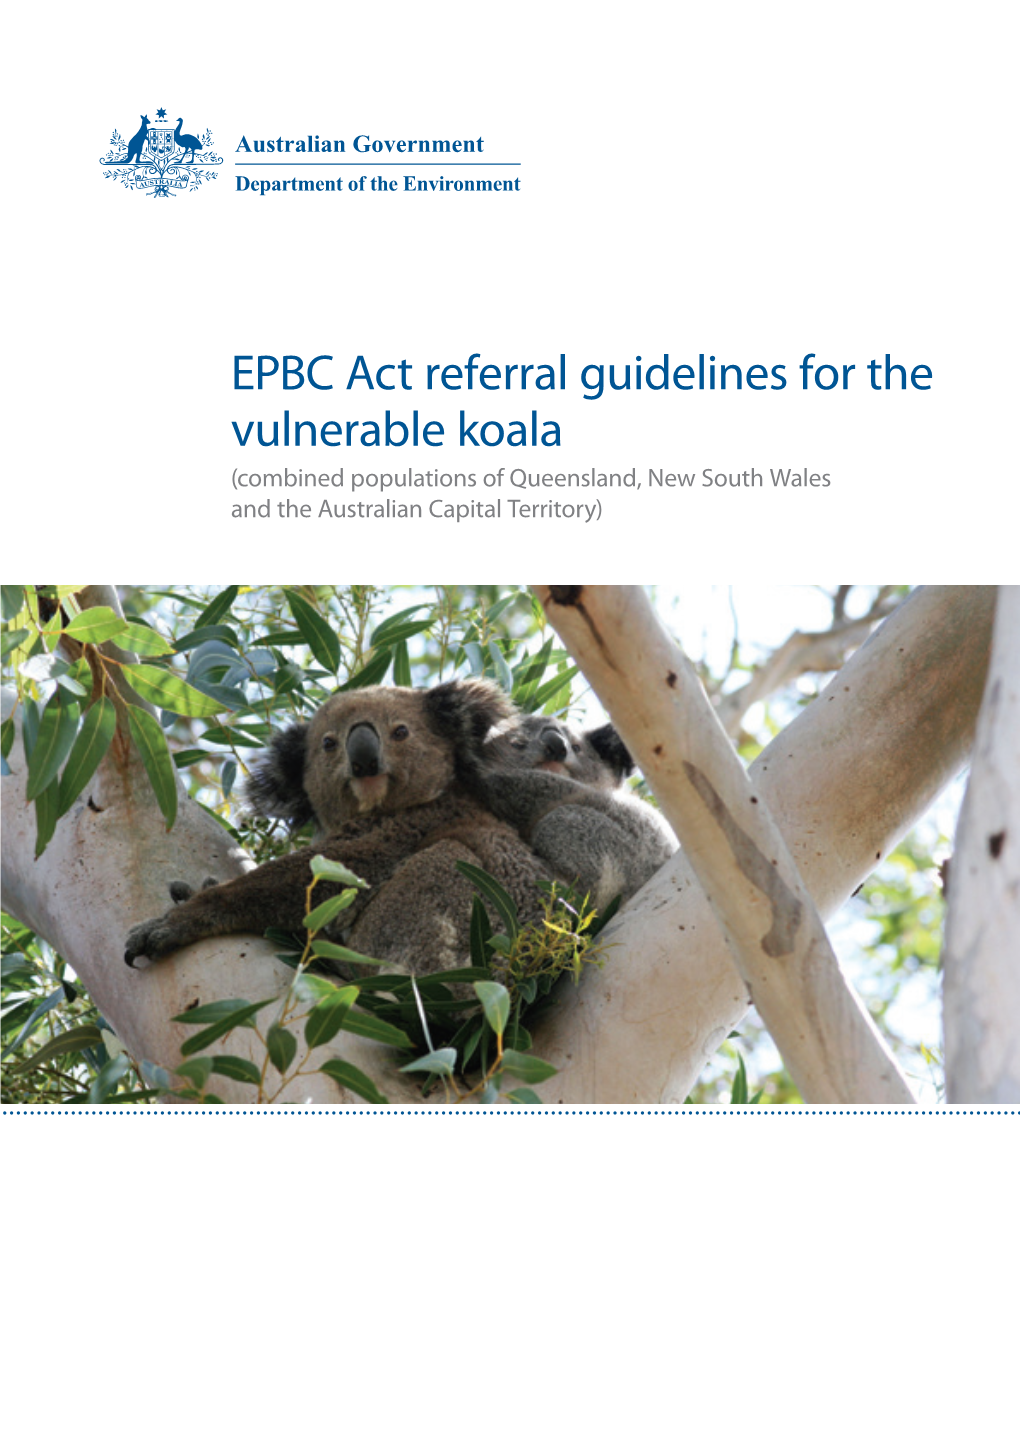 EPBC Act Referral Guidelines for the Vulnerable Koala